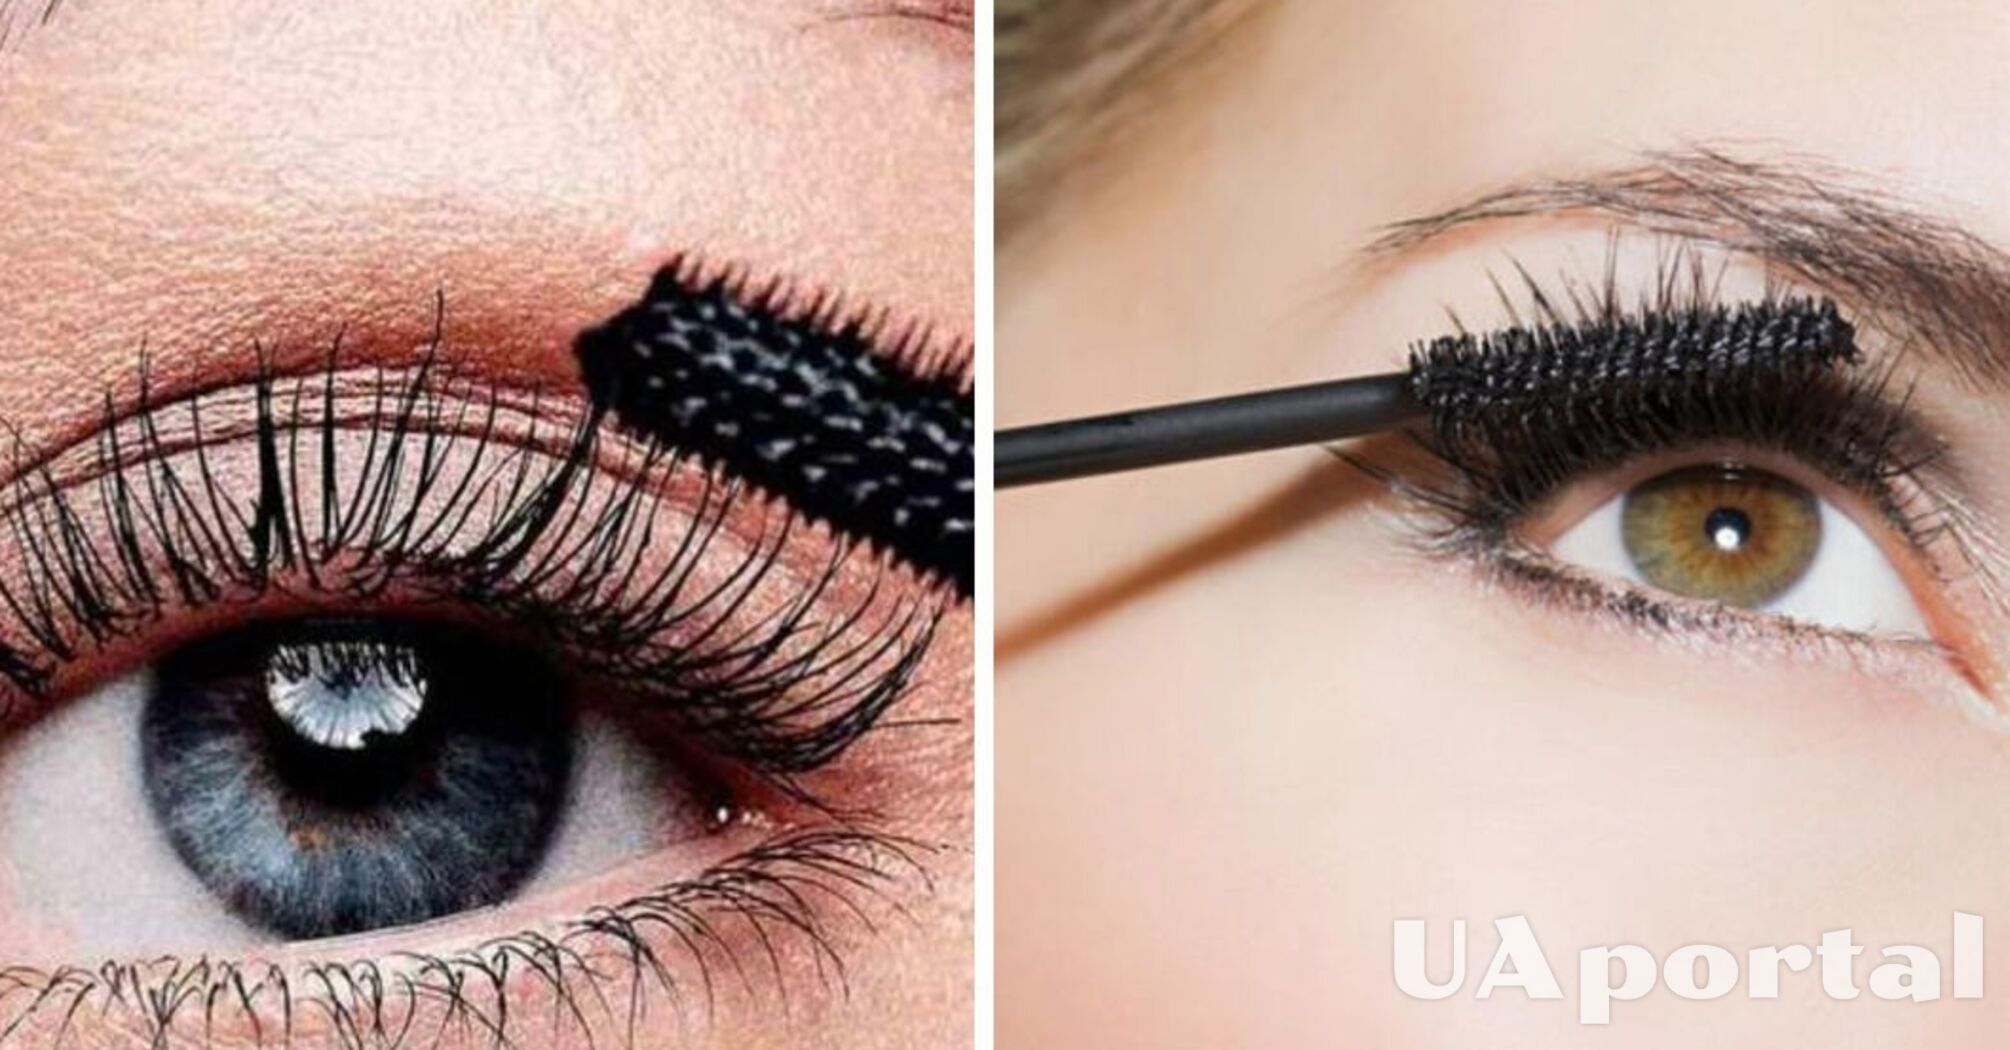 How to apply mascara without smudging: an effective life hack